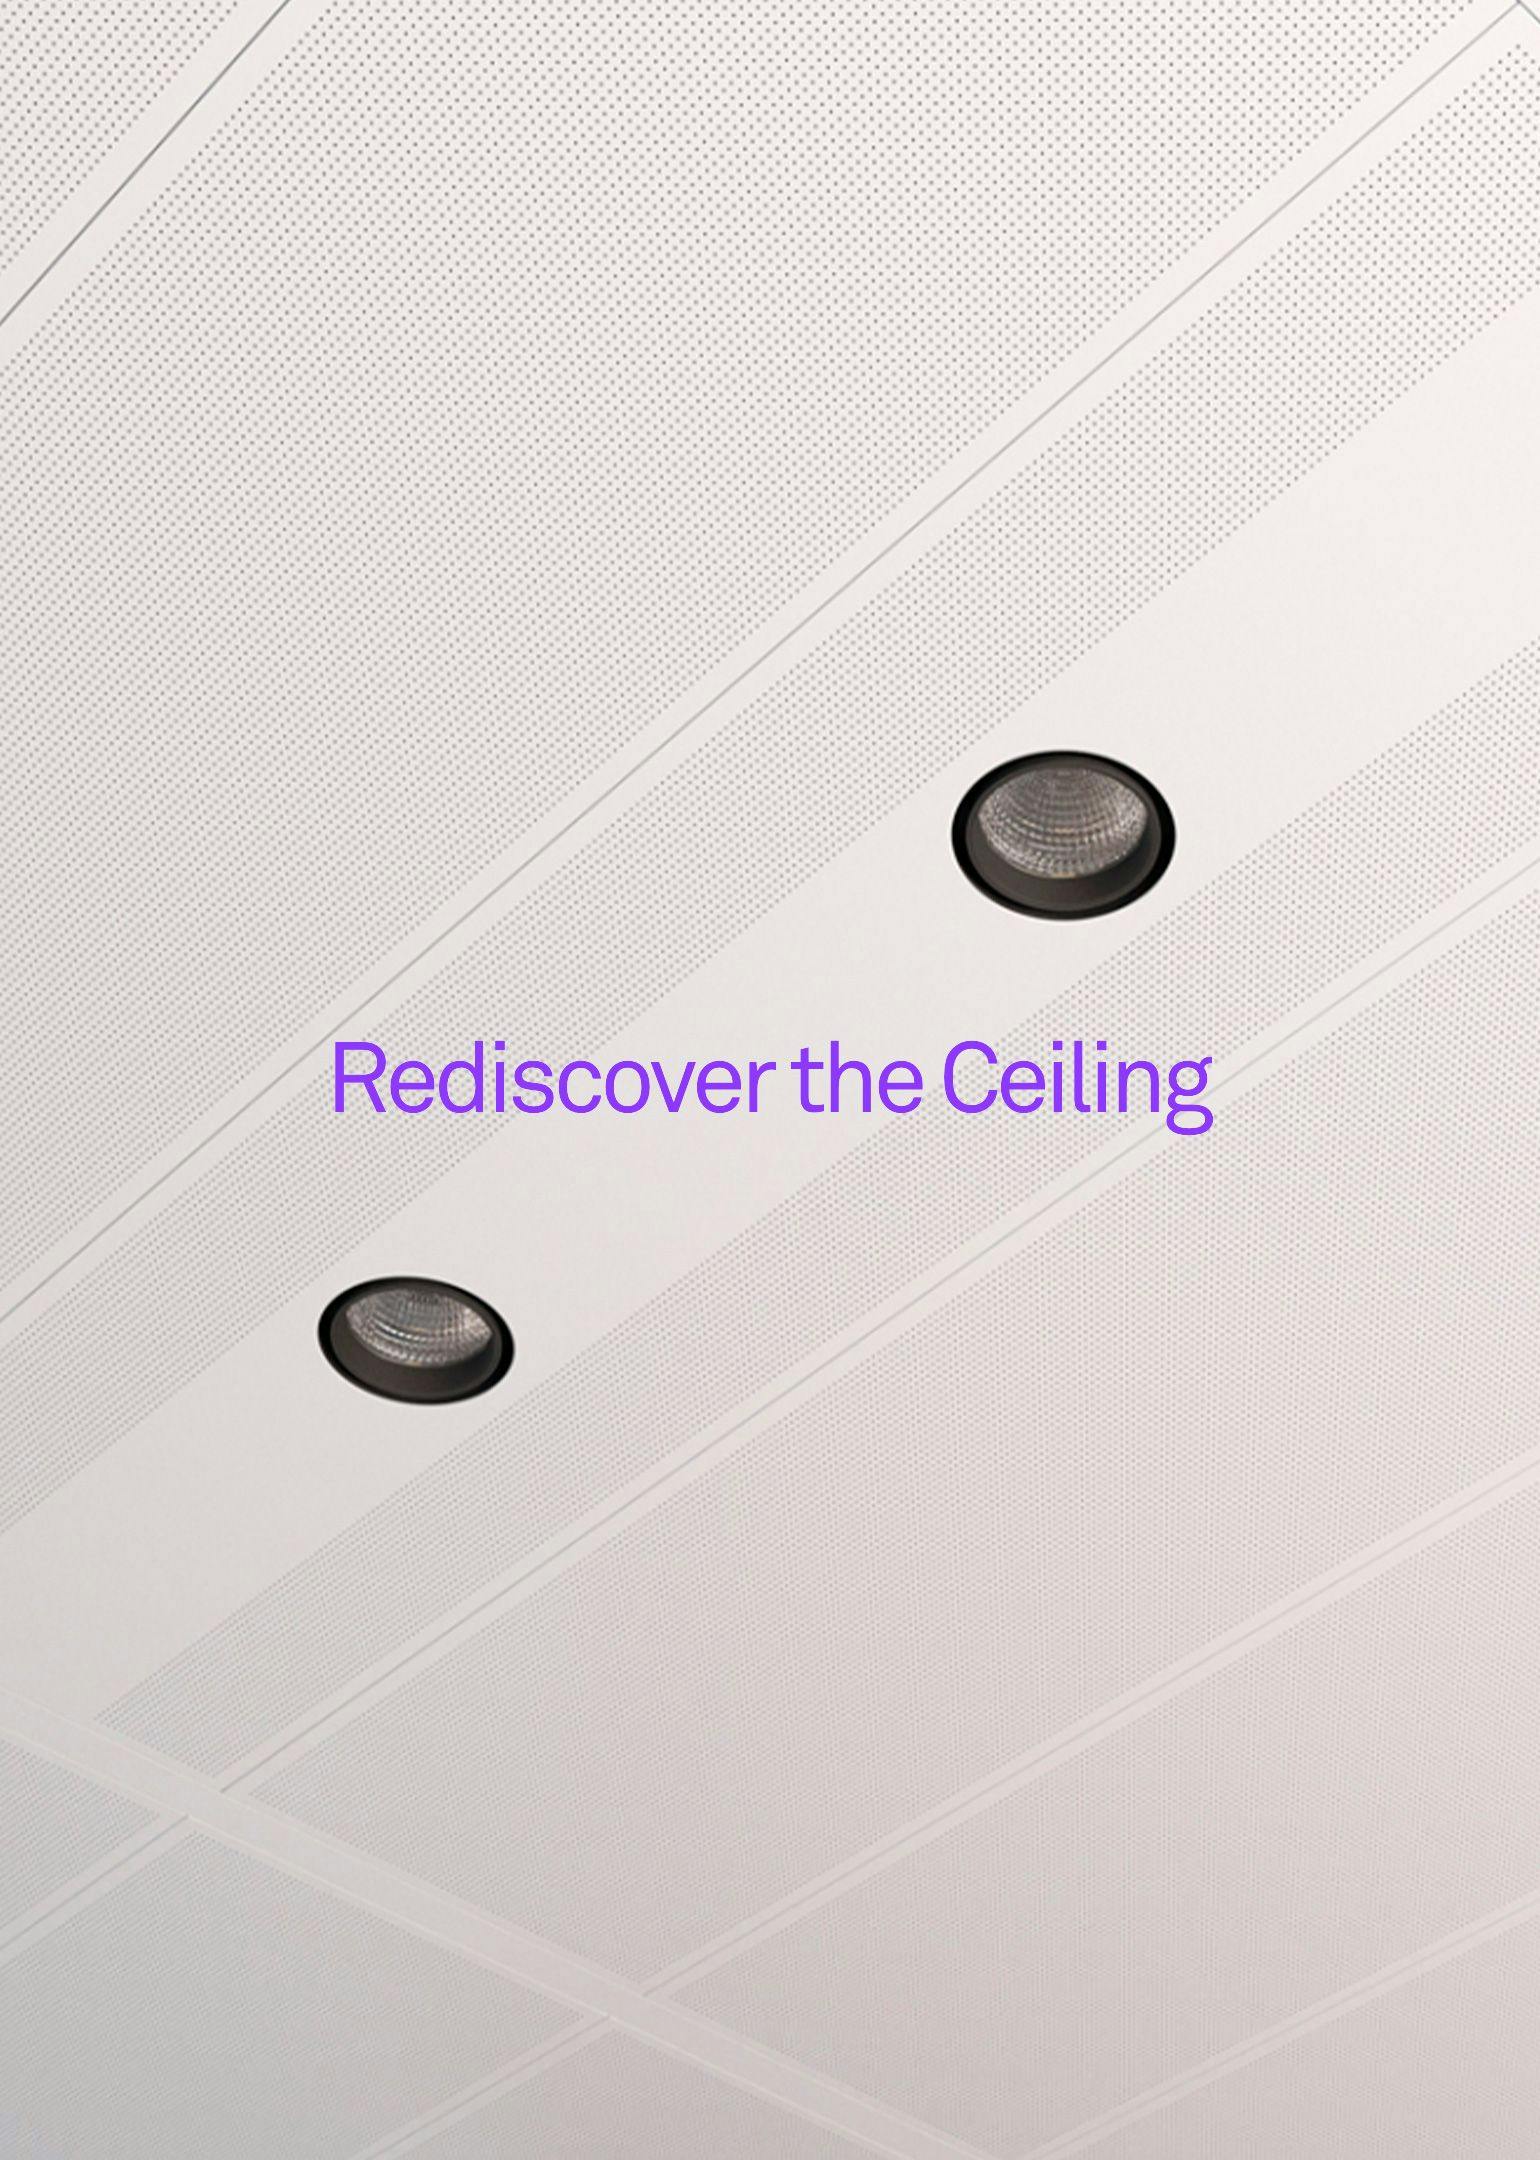 LedsC4 Lighting Architectural Systems Rediscover the Ceiling